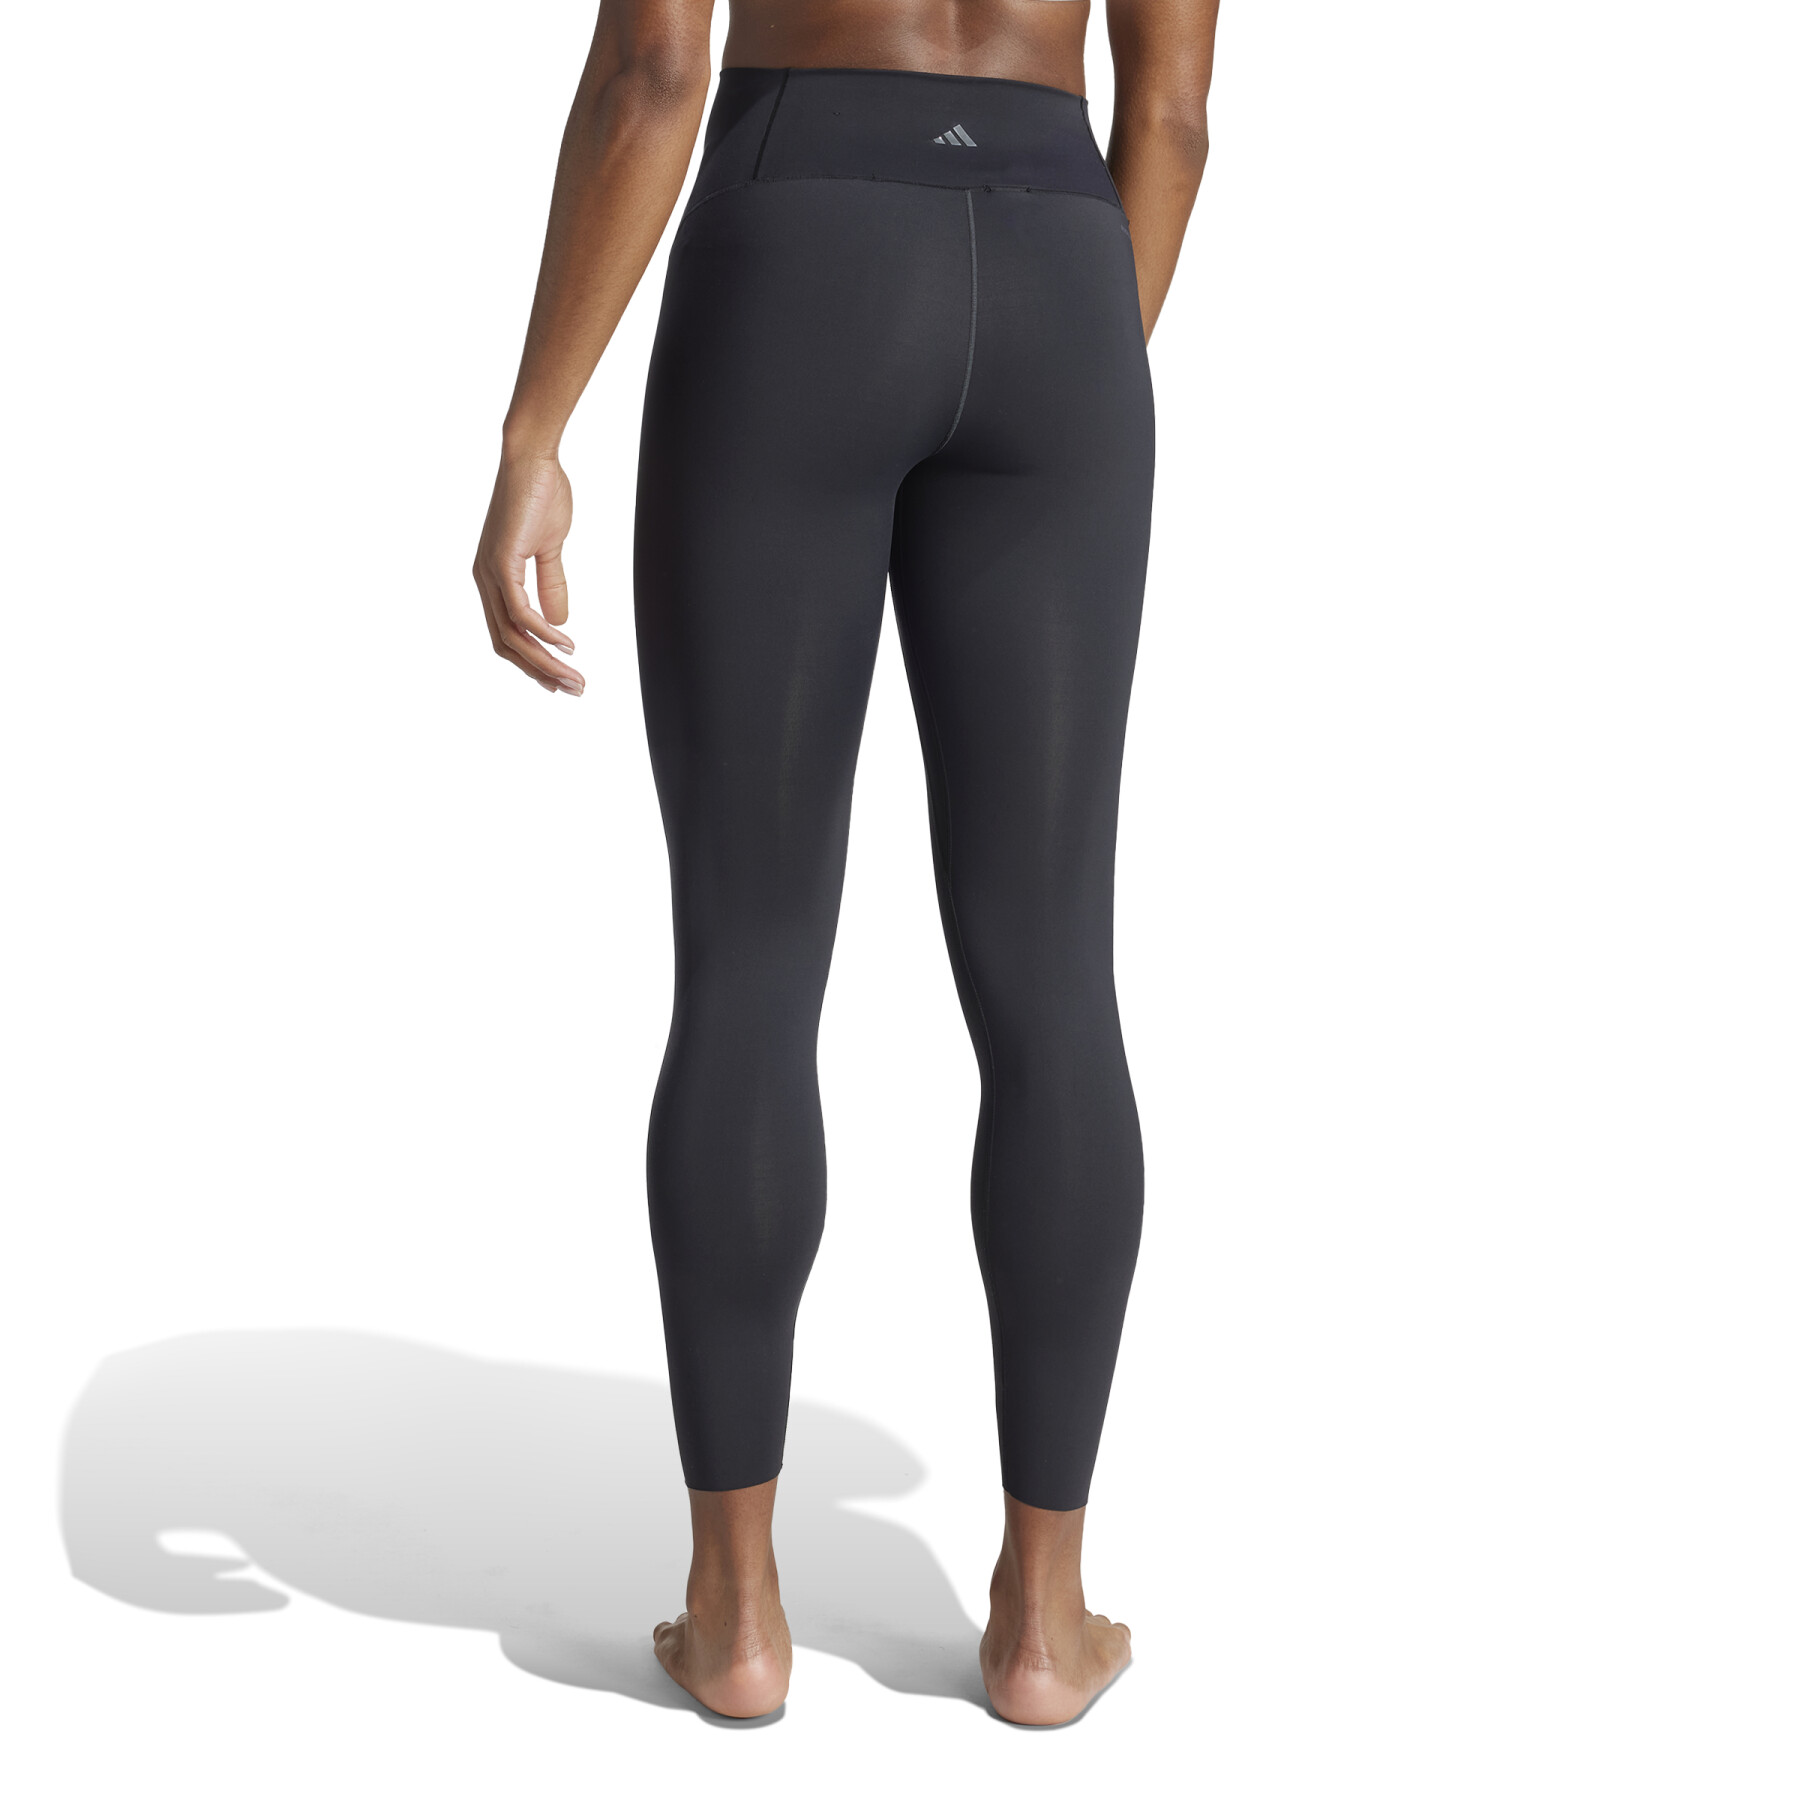 Legging 7/8 para mulher adidas All Me Luxe